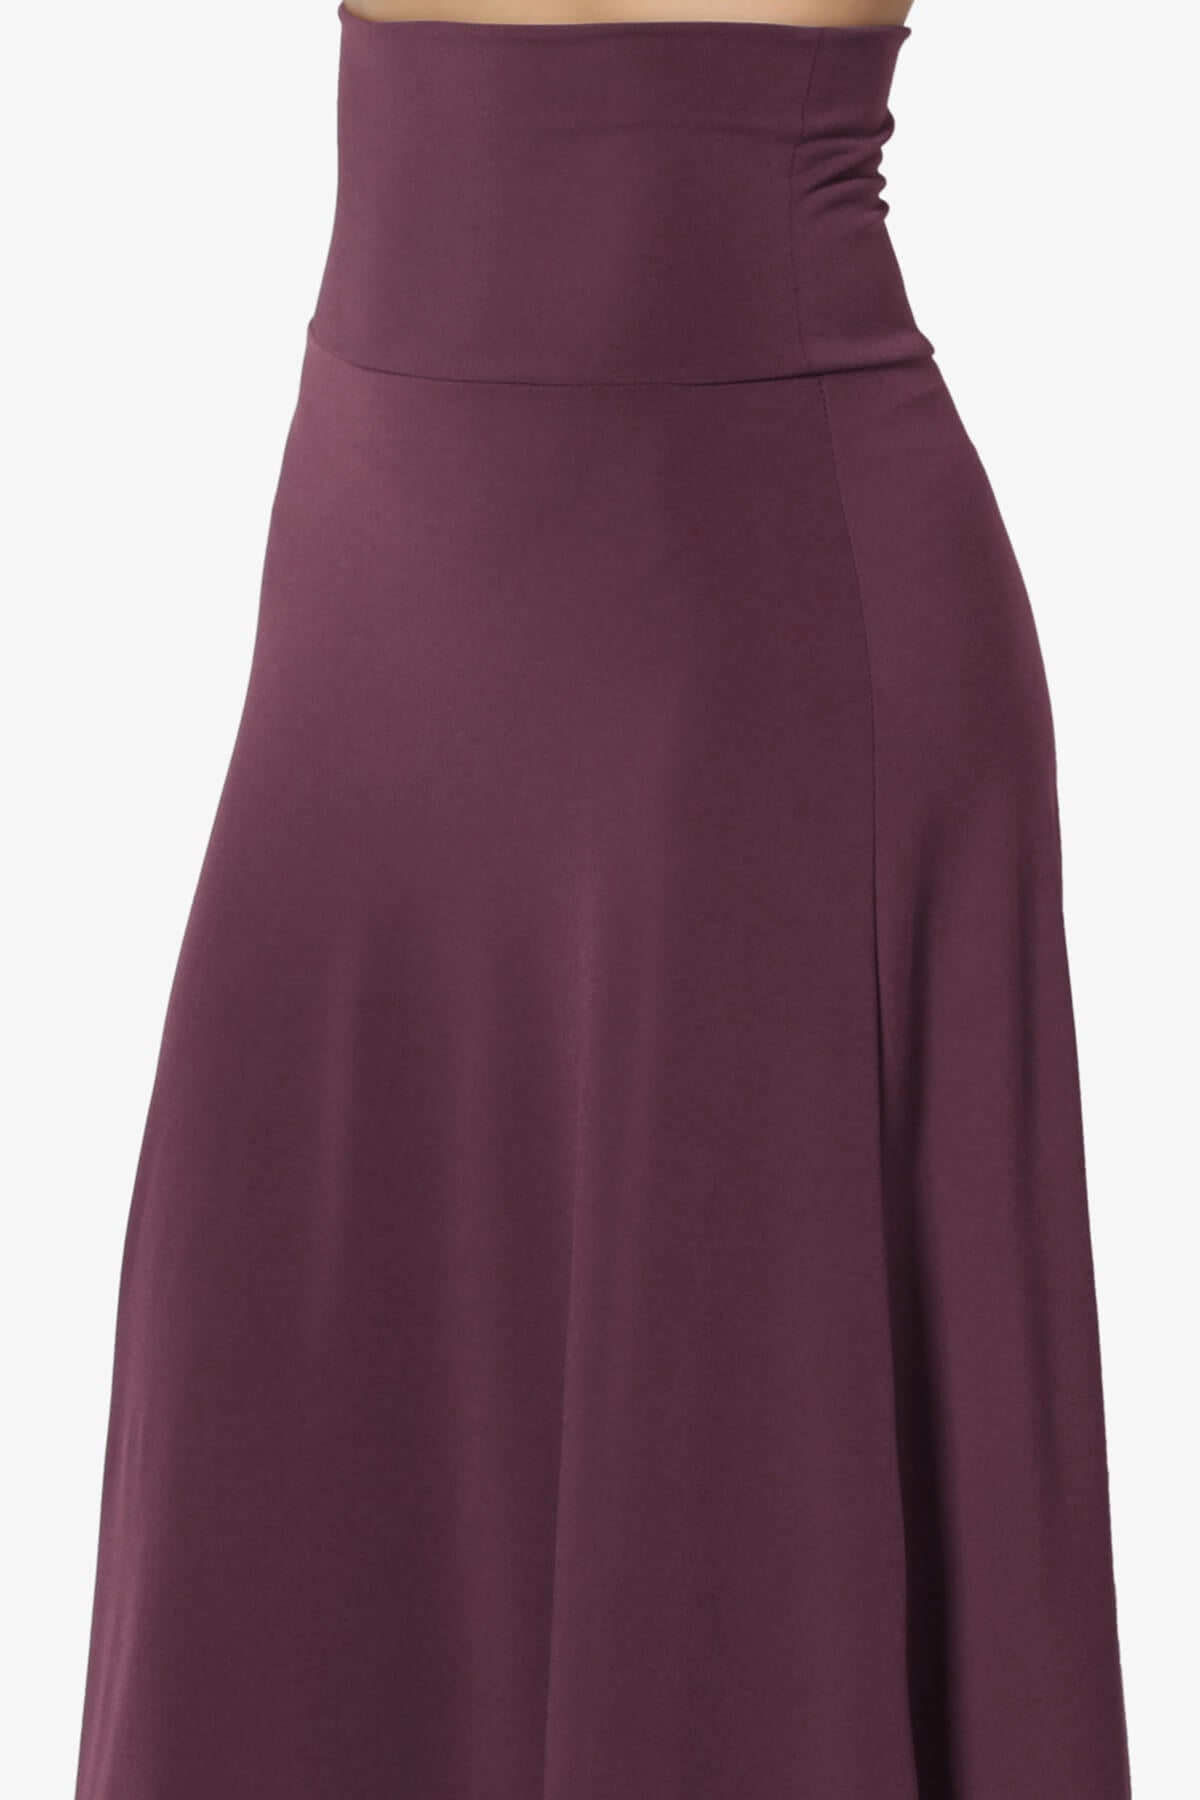 Load image into Gallery viewer, Nolan Stretch Flared Knee Skirt DUSTY PLUM_5
